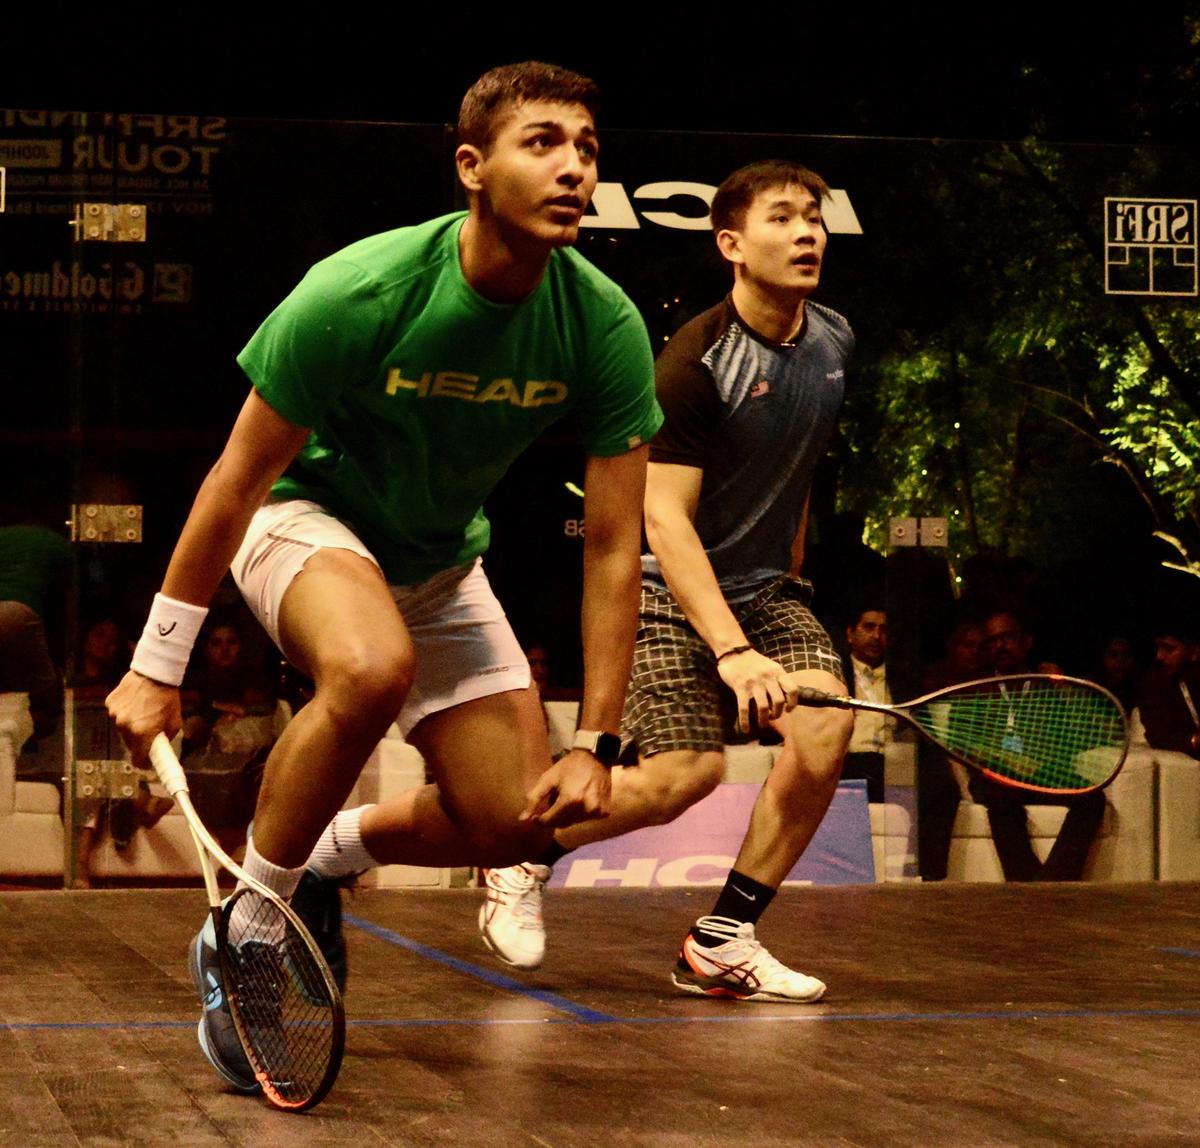 Abhay to take on Zahed in final